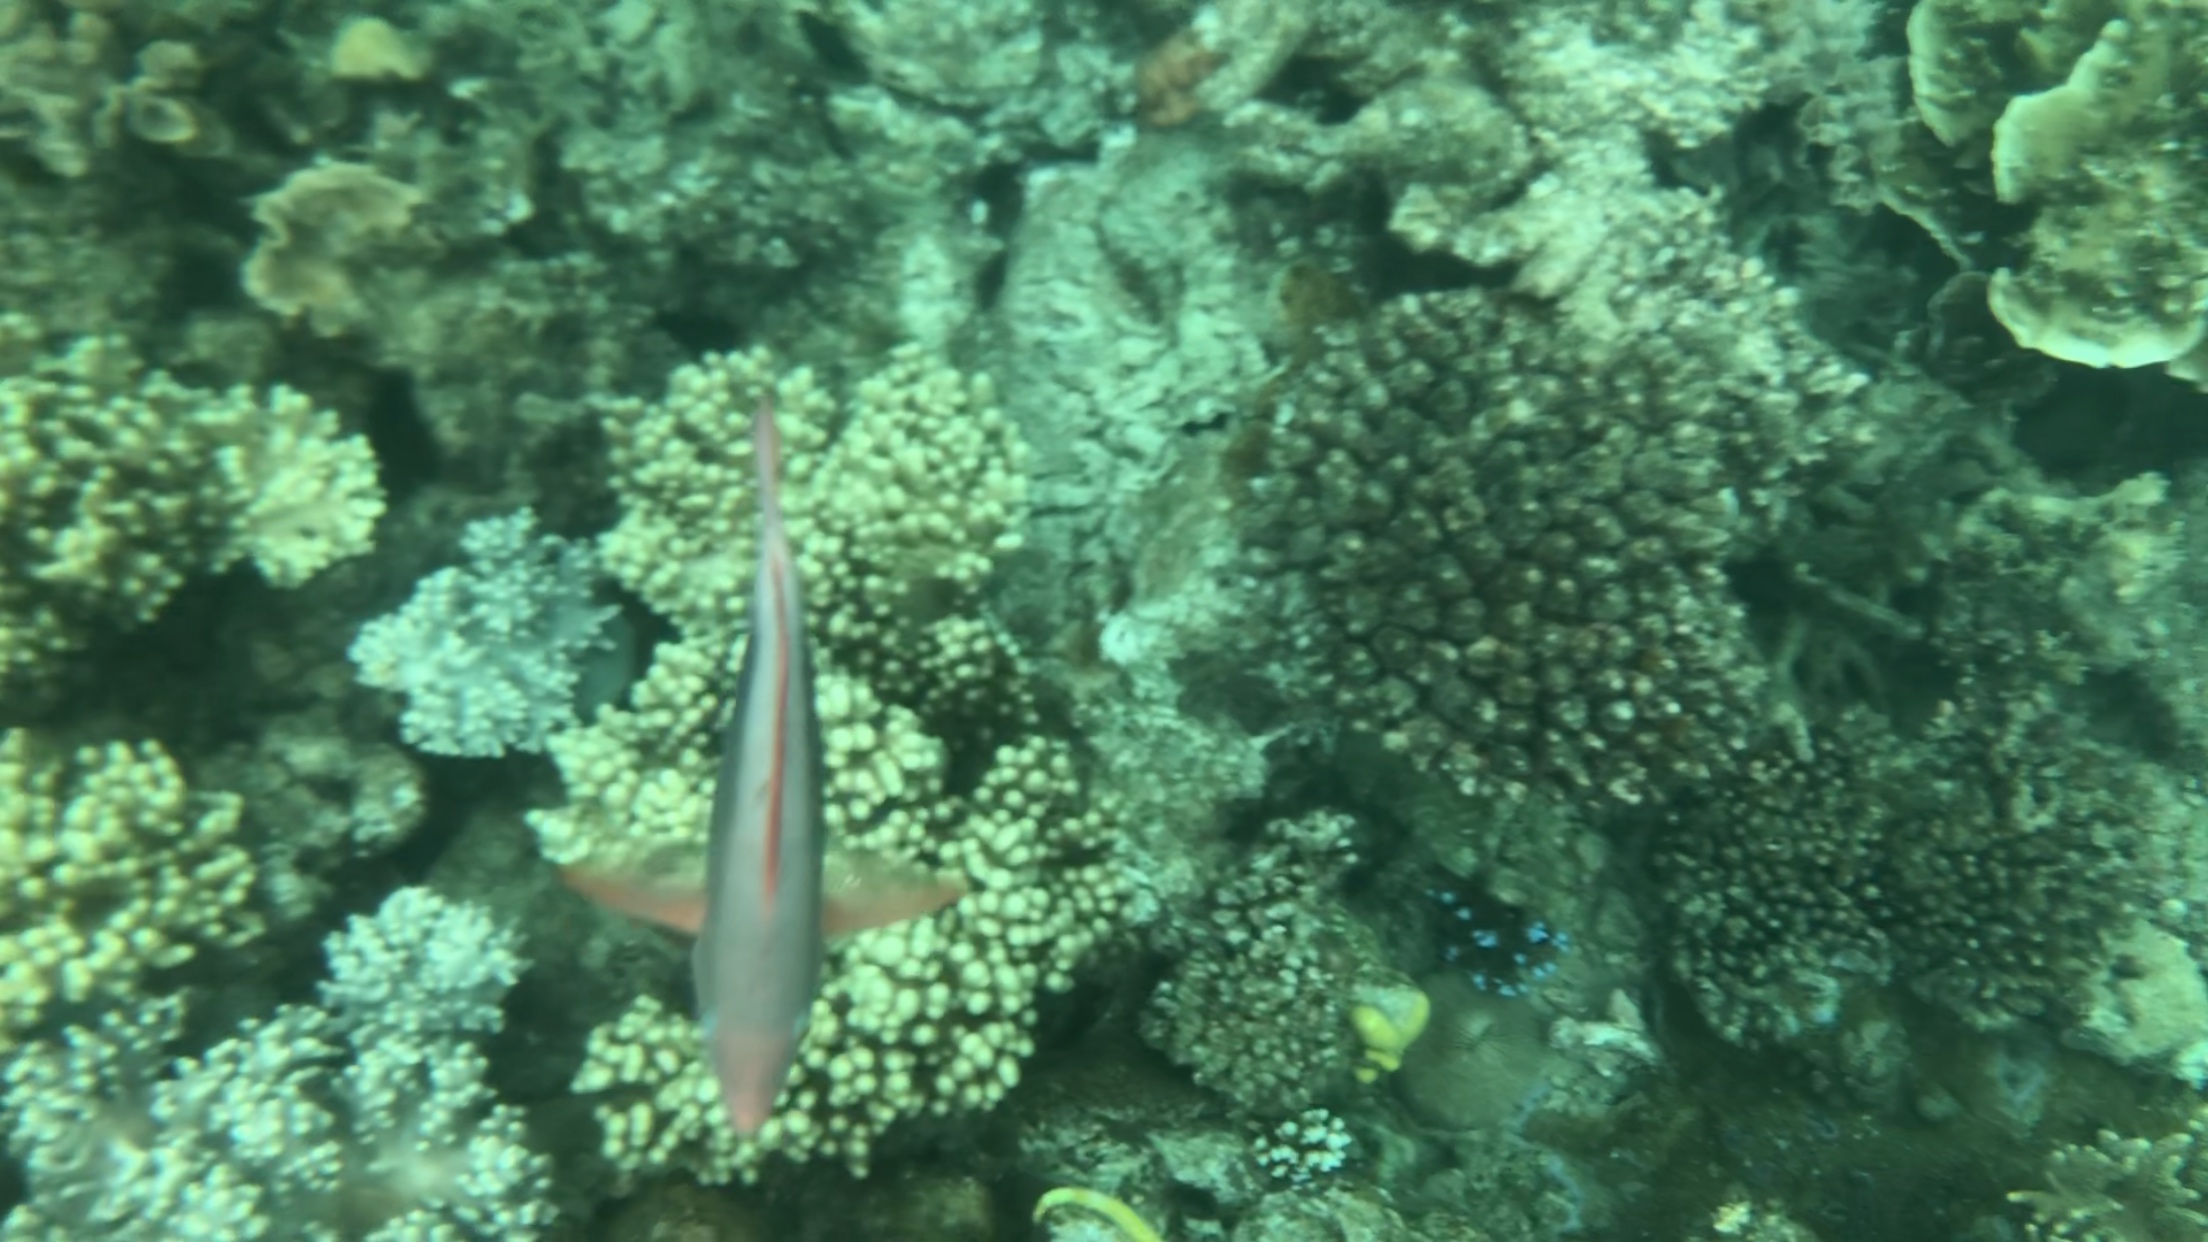  Pictures of Moore Reef. These are from my iPhone, I just took a screenshot from the videos I took. 